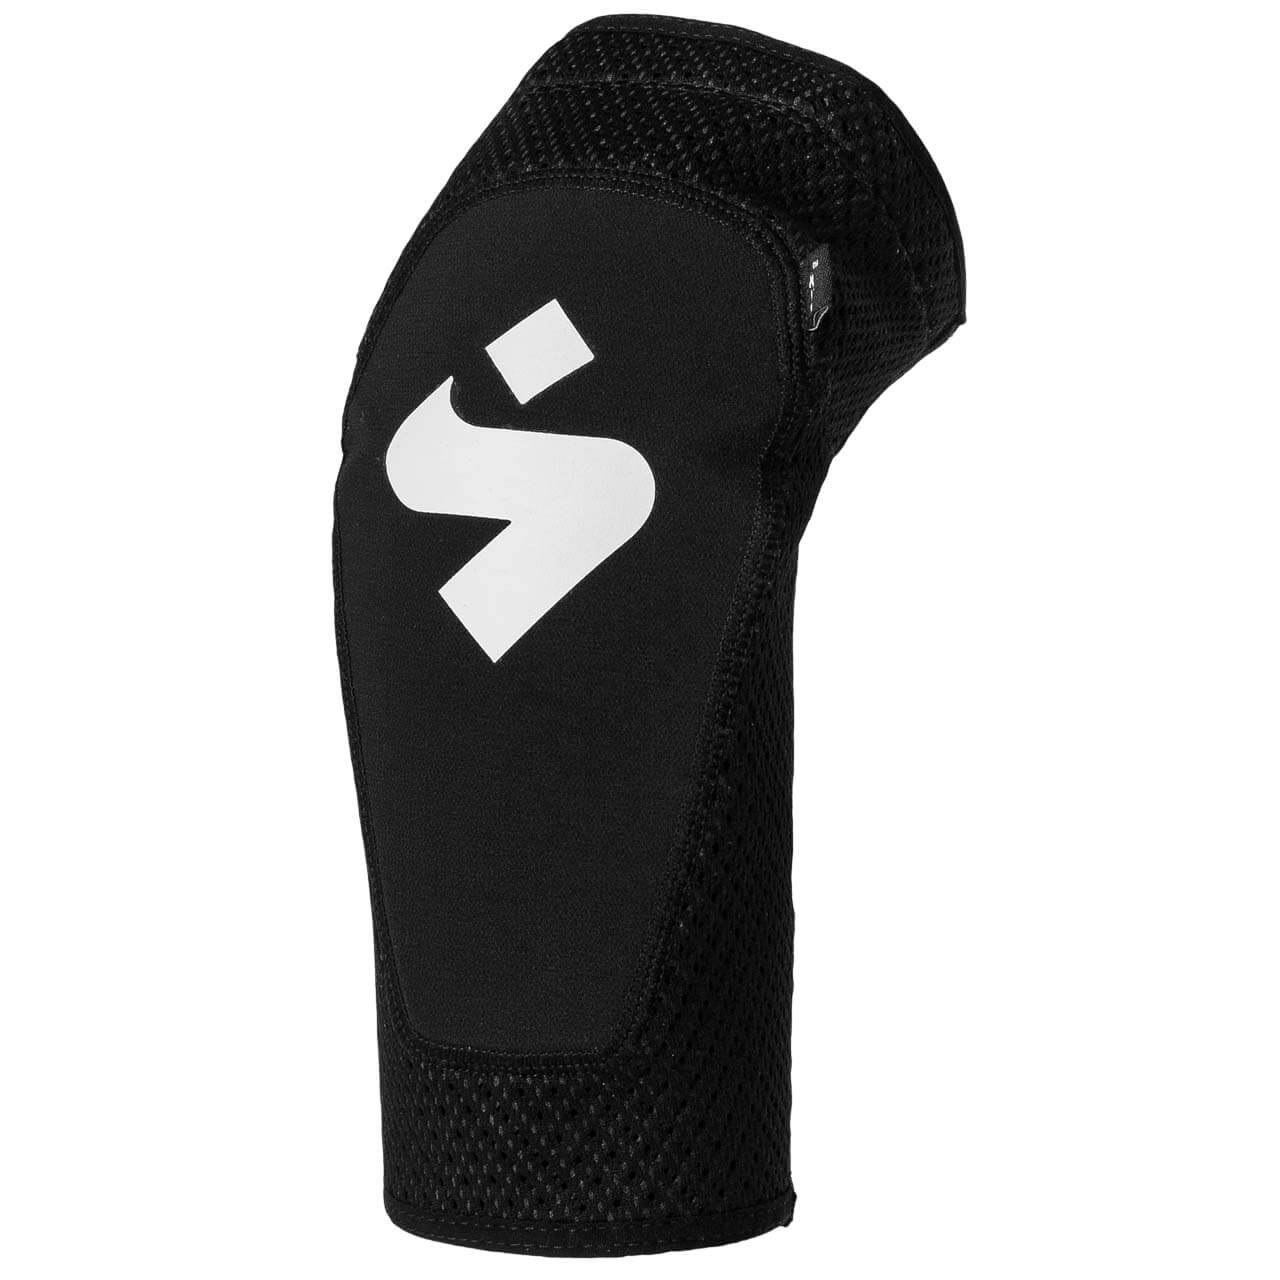 Sweet Protection Elbow Guards Light - Black, S